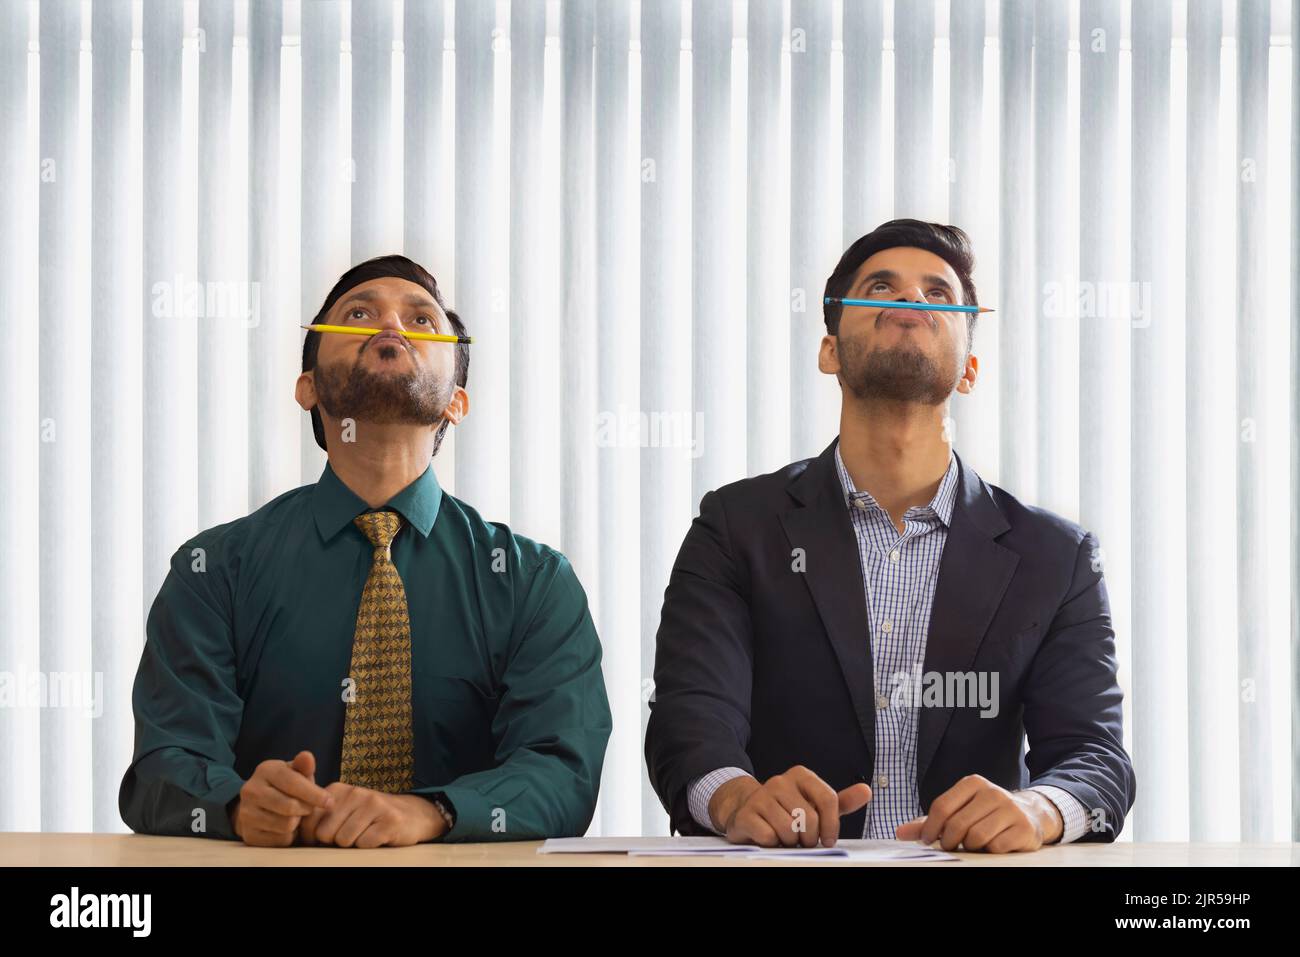 Corporate co-workers sitting together and balancing pencils on their nose. Stock Photo